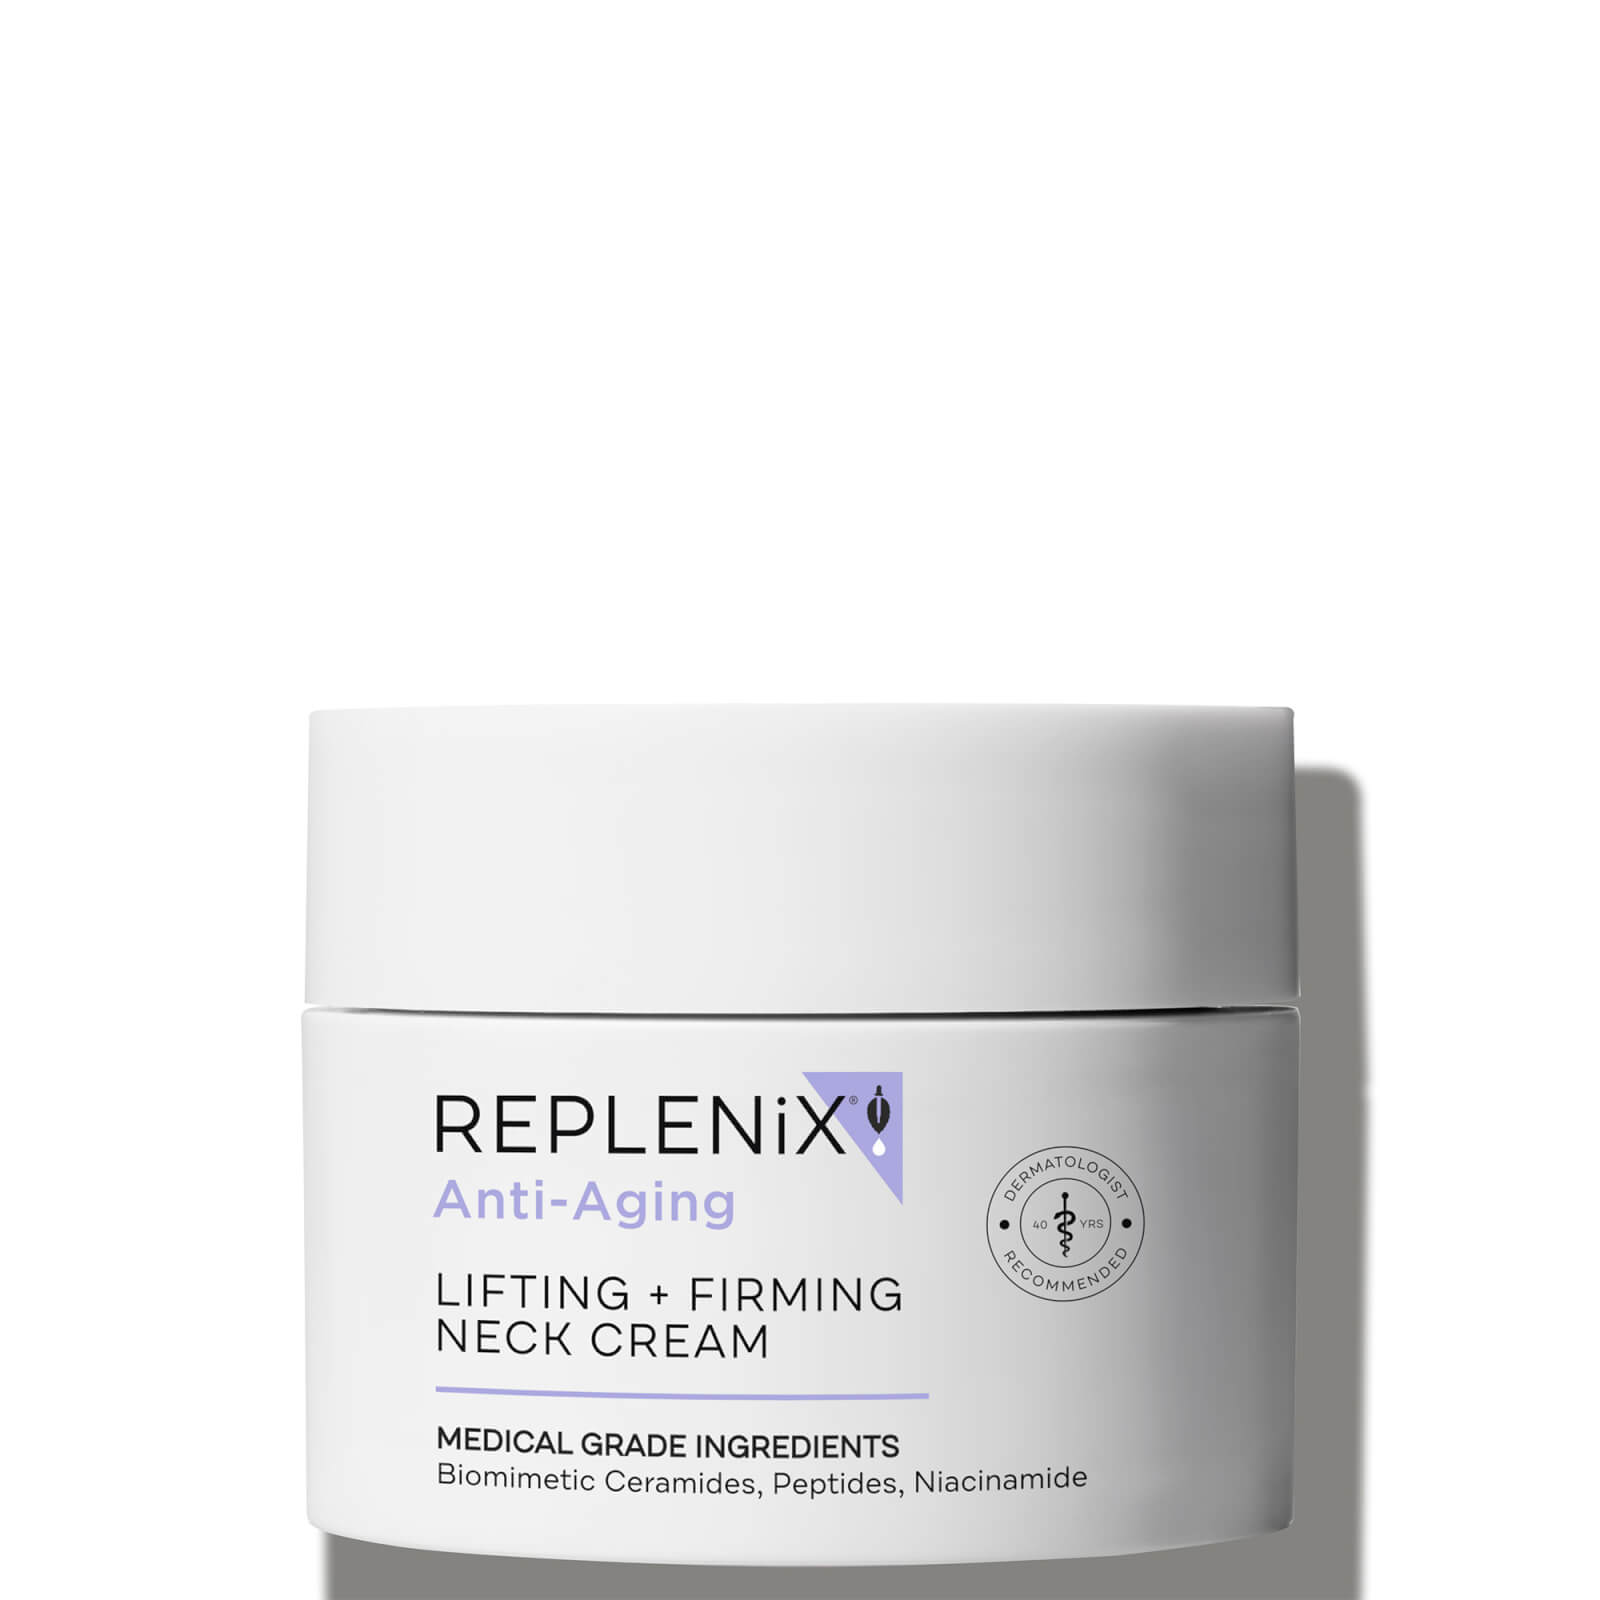 Replenix Lifting And Firming Neck Cream 1.7 oz In White